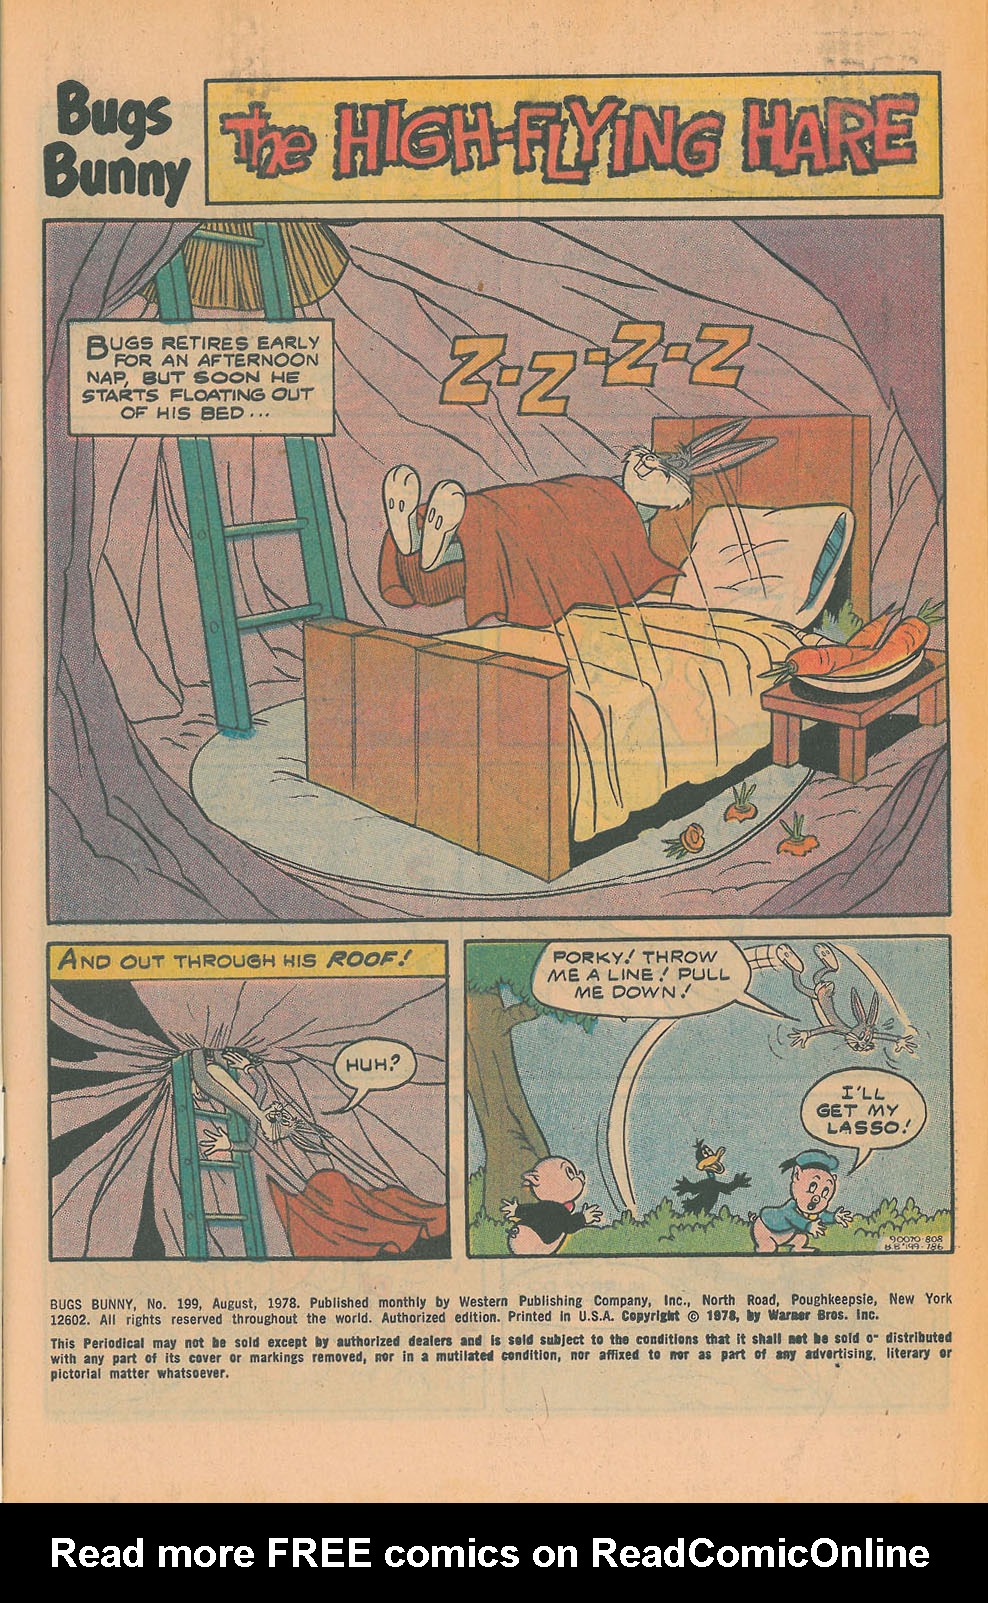 Read online Bugs Bunny comic -  Issue #199 - 3